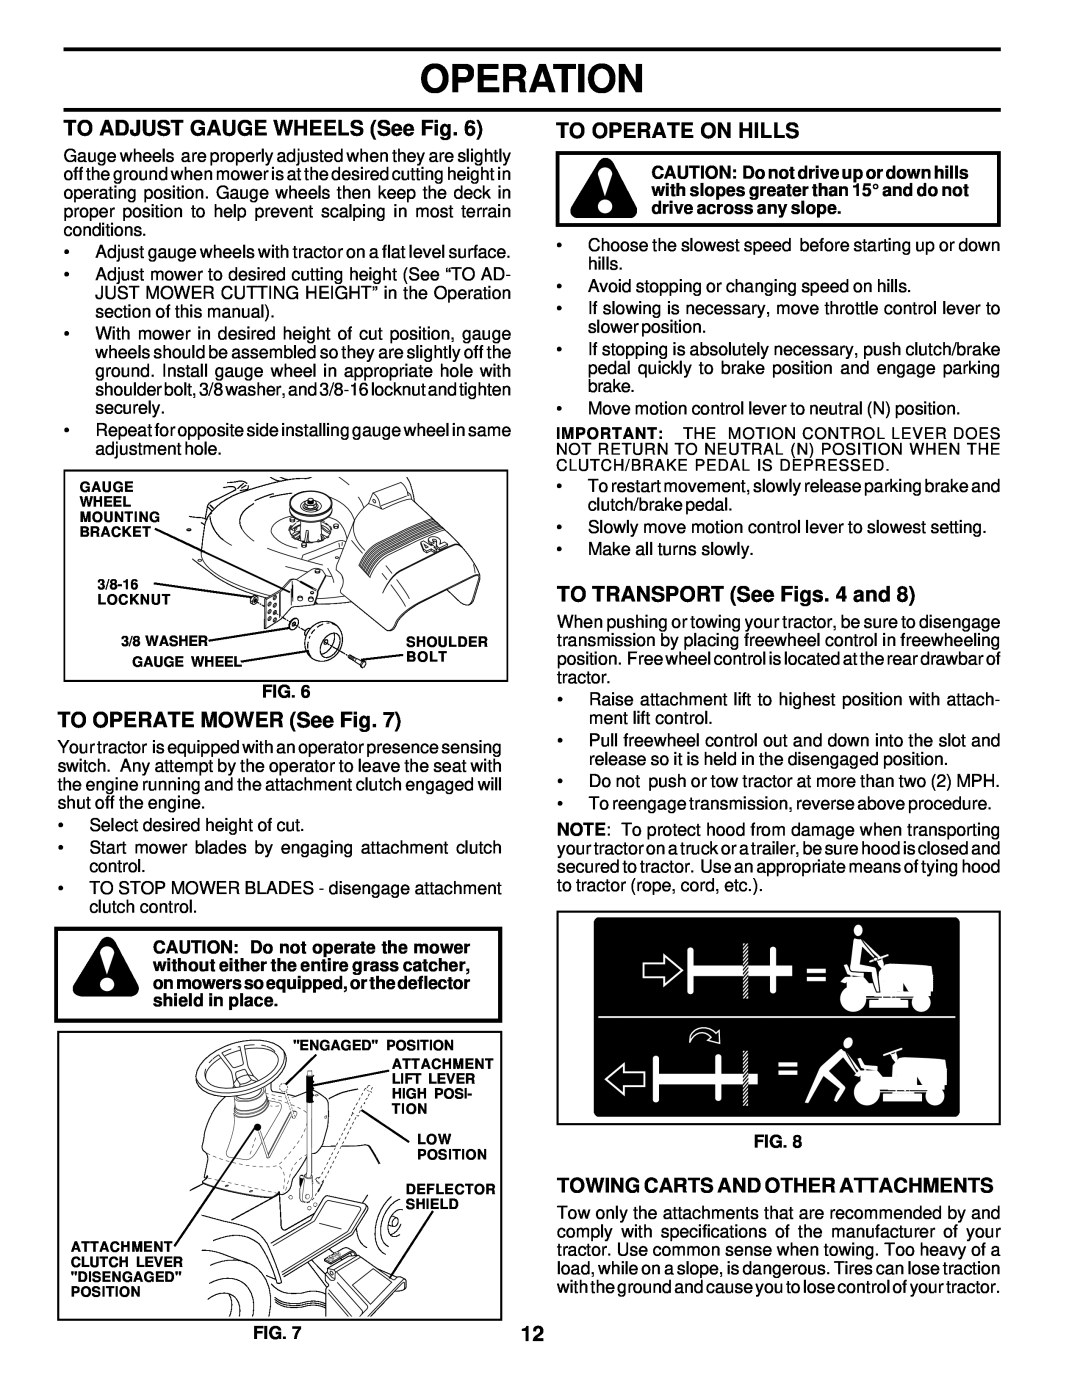 Weed Eater 177019 manual TO ADJUST GAUGE WHEELS See Fig, TO OPERATE MOWER See Fig, To Operate On Hills, Operation 